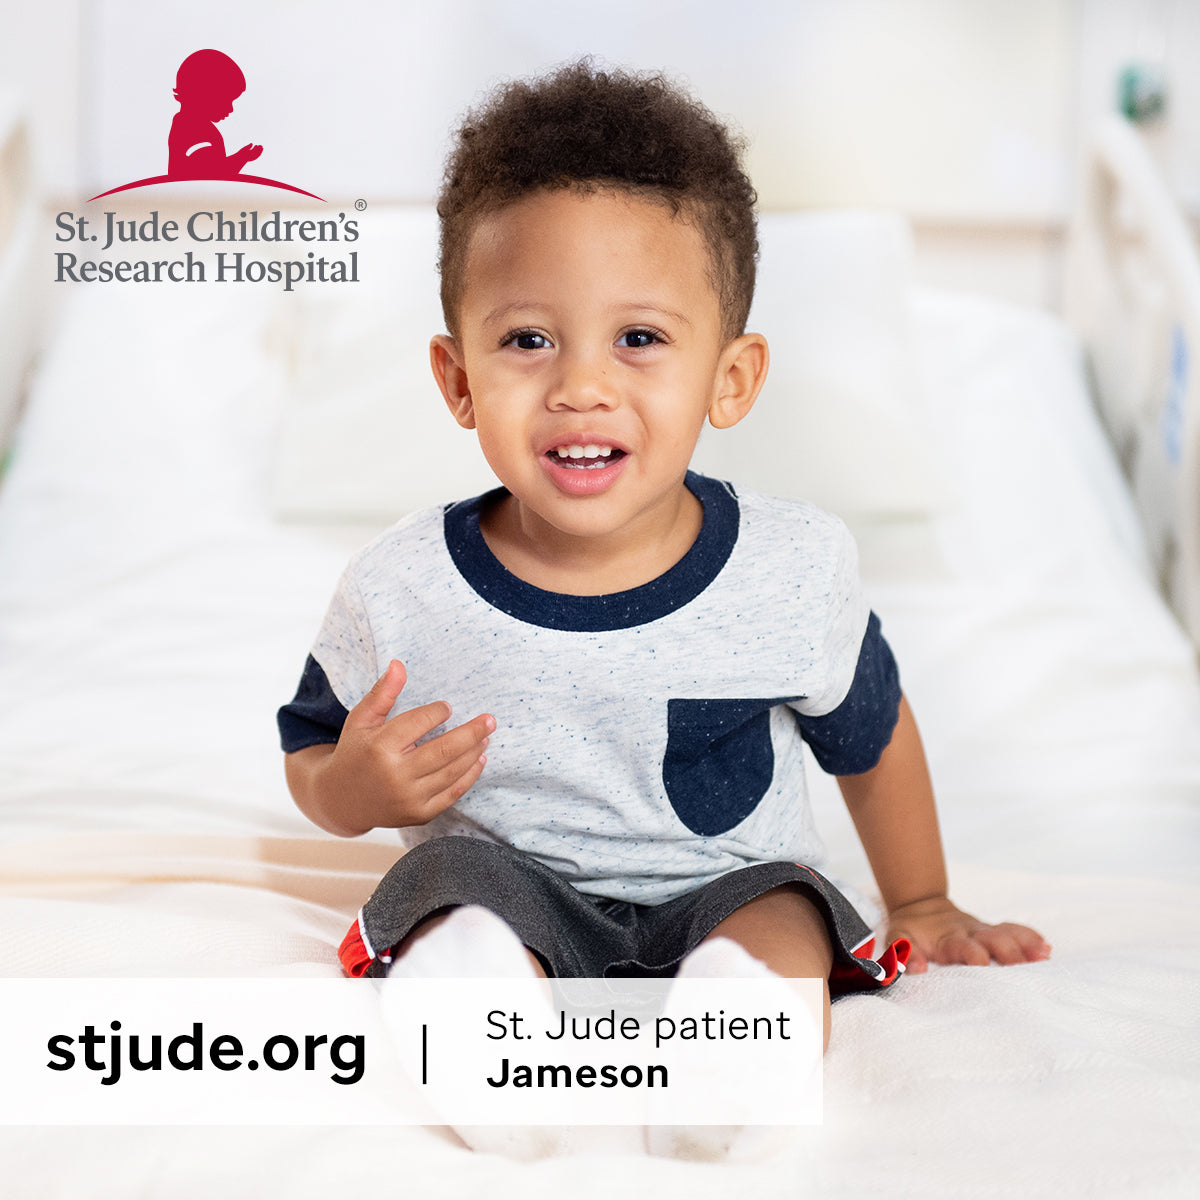 Our Partnership with St. Jude Children's Research Hospital®